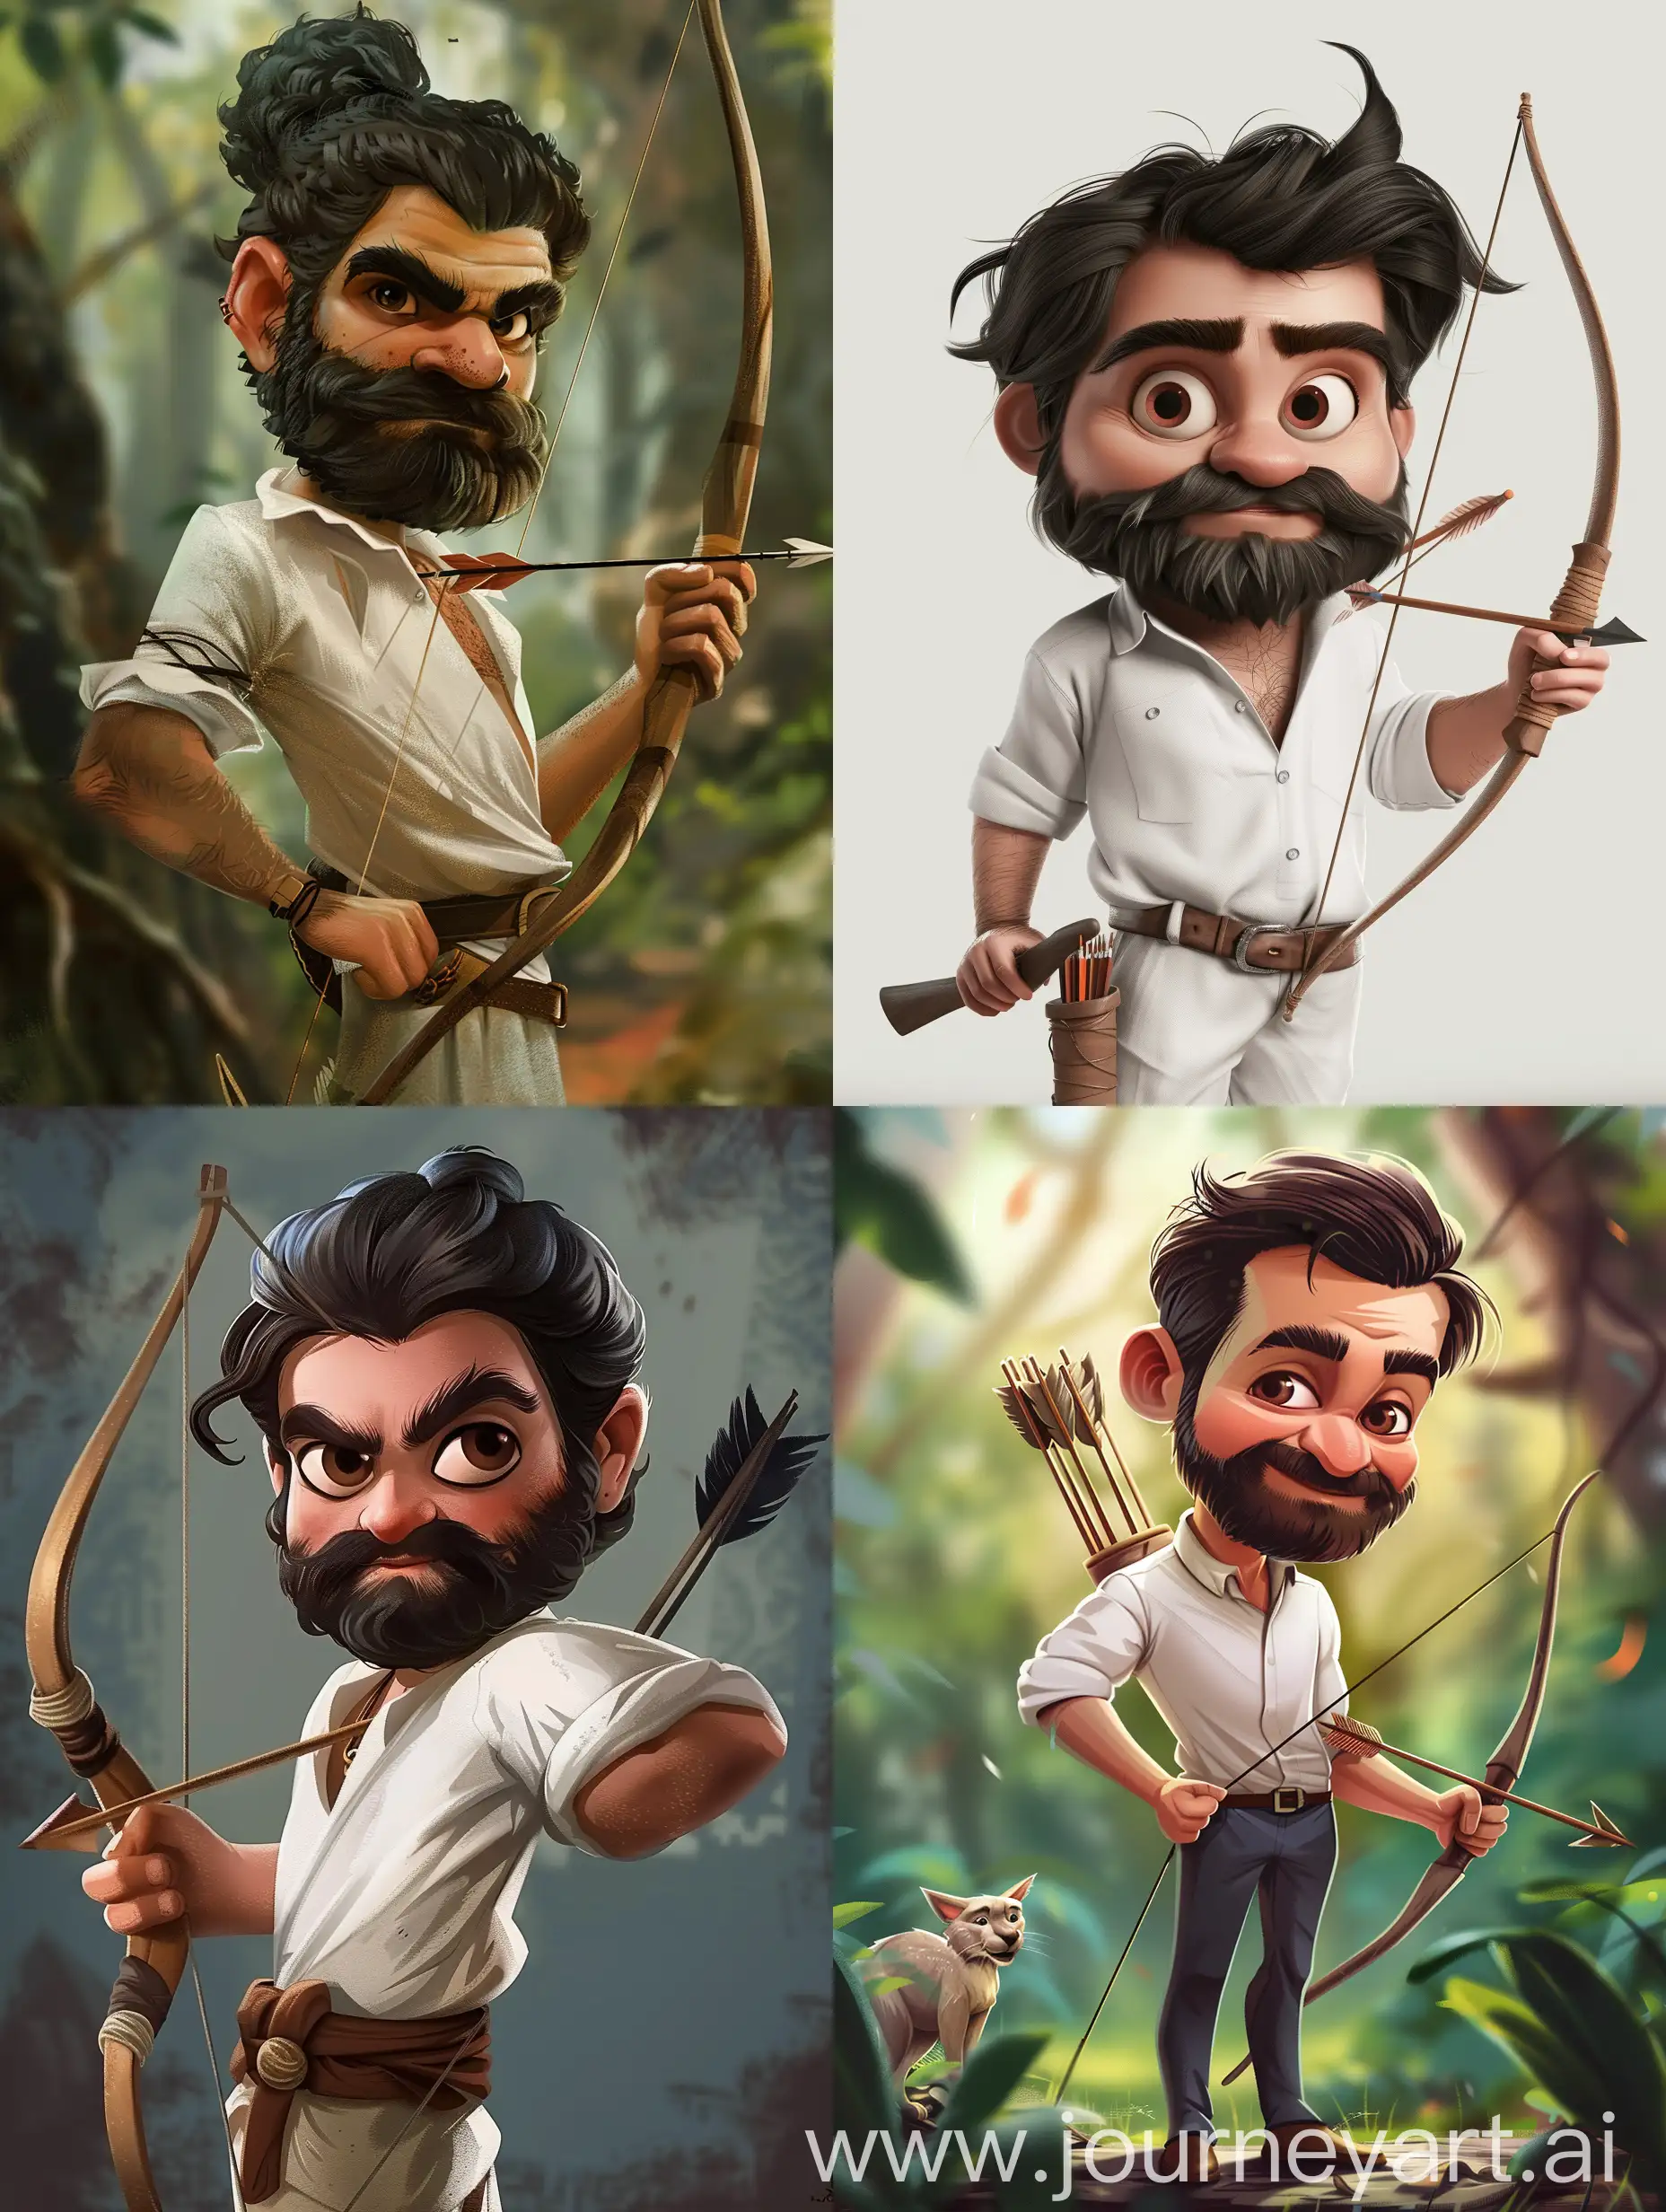 Eknath-Shinde-in-White-Shirt-with-Bow-and-Arrow-Caricature-as-a-Pixar-Disney-Character